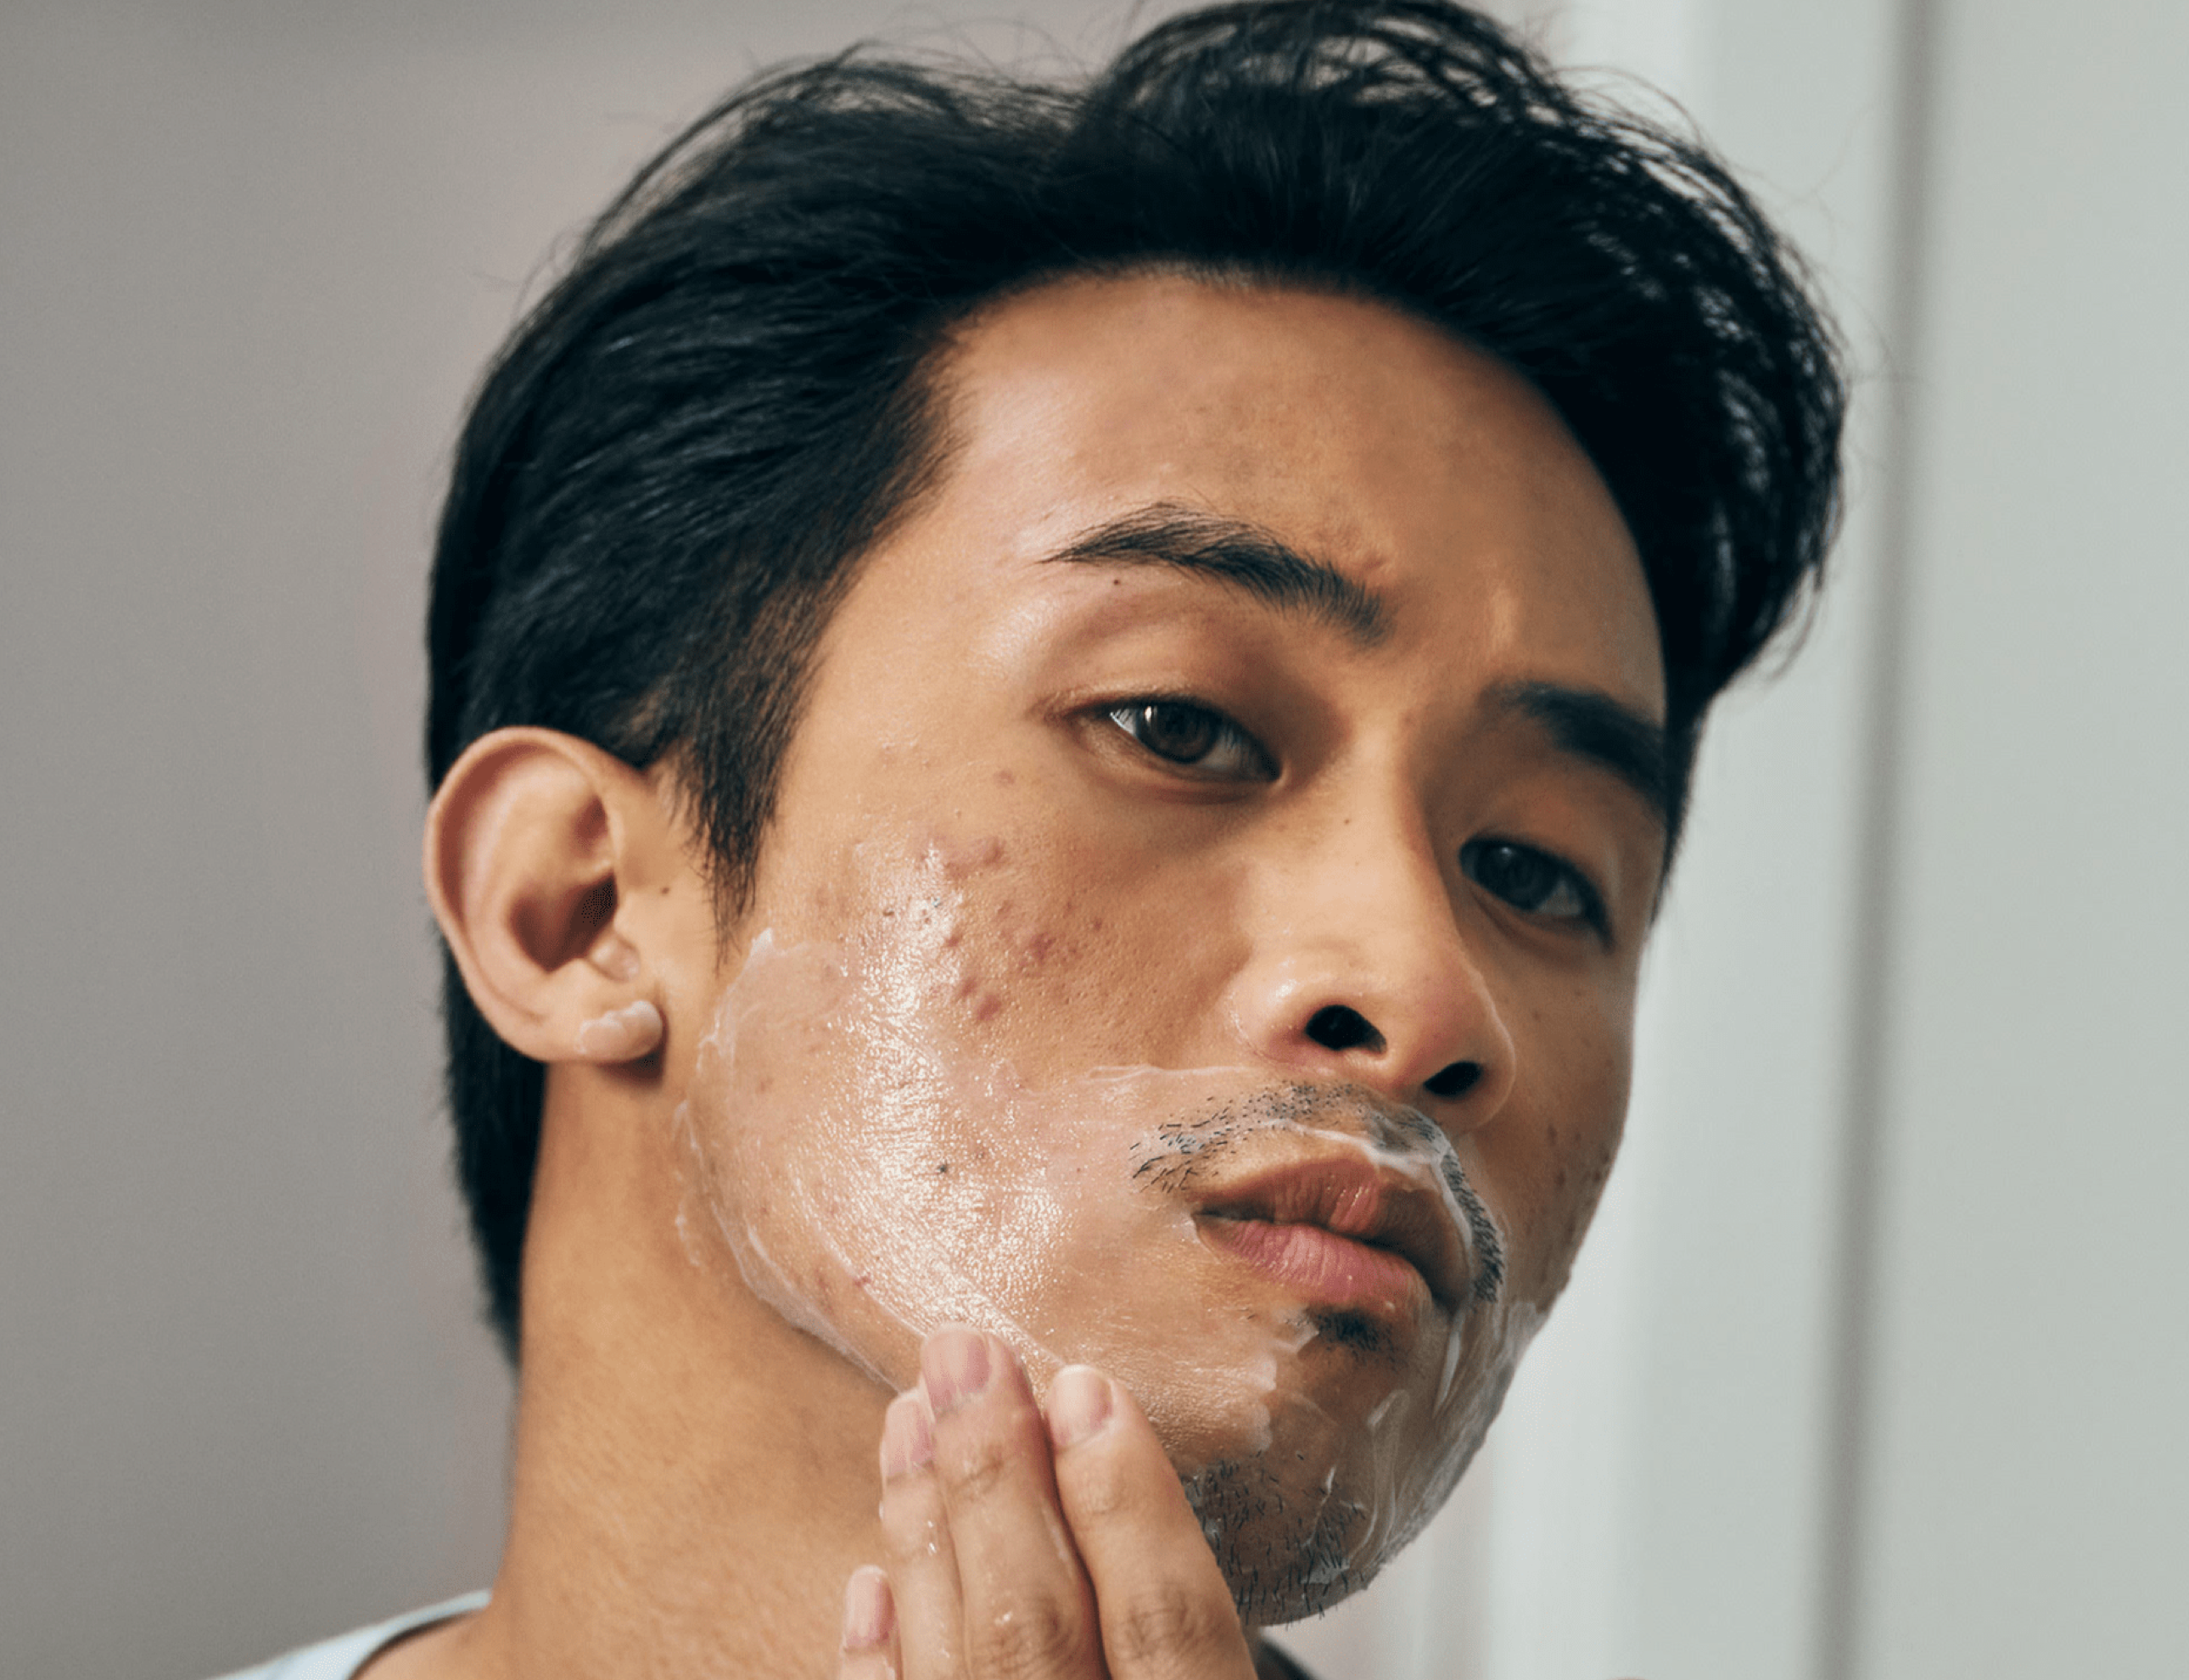 Image of Man Shaving With Acne.